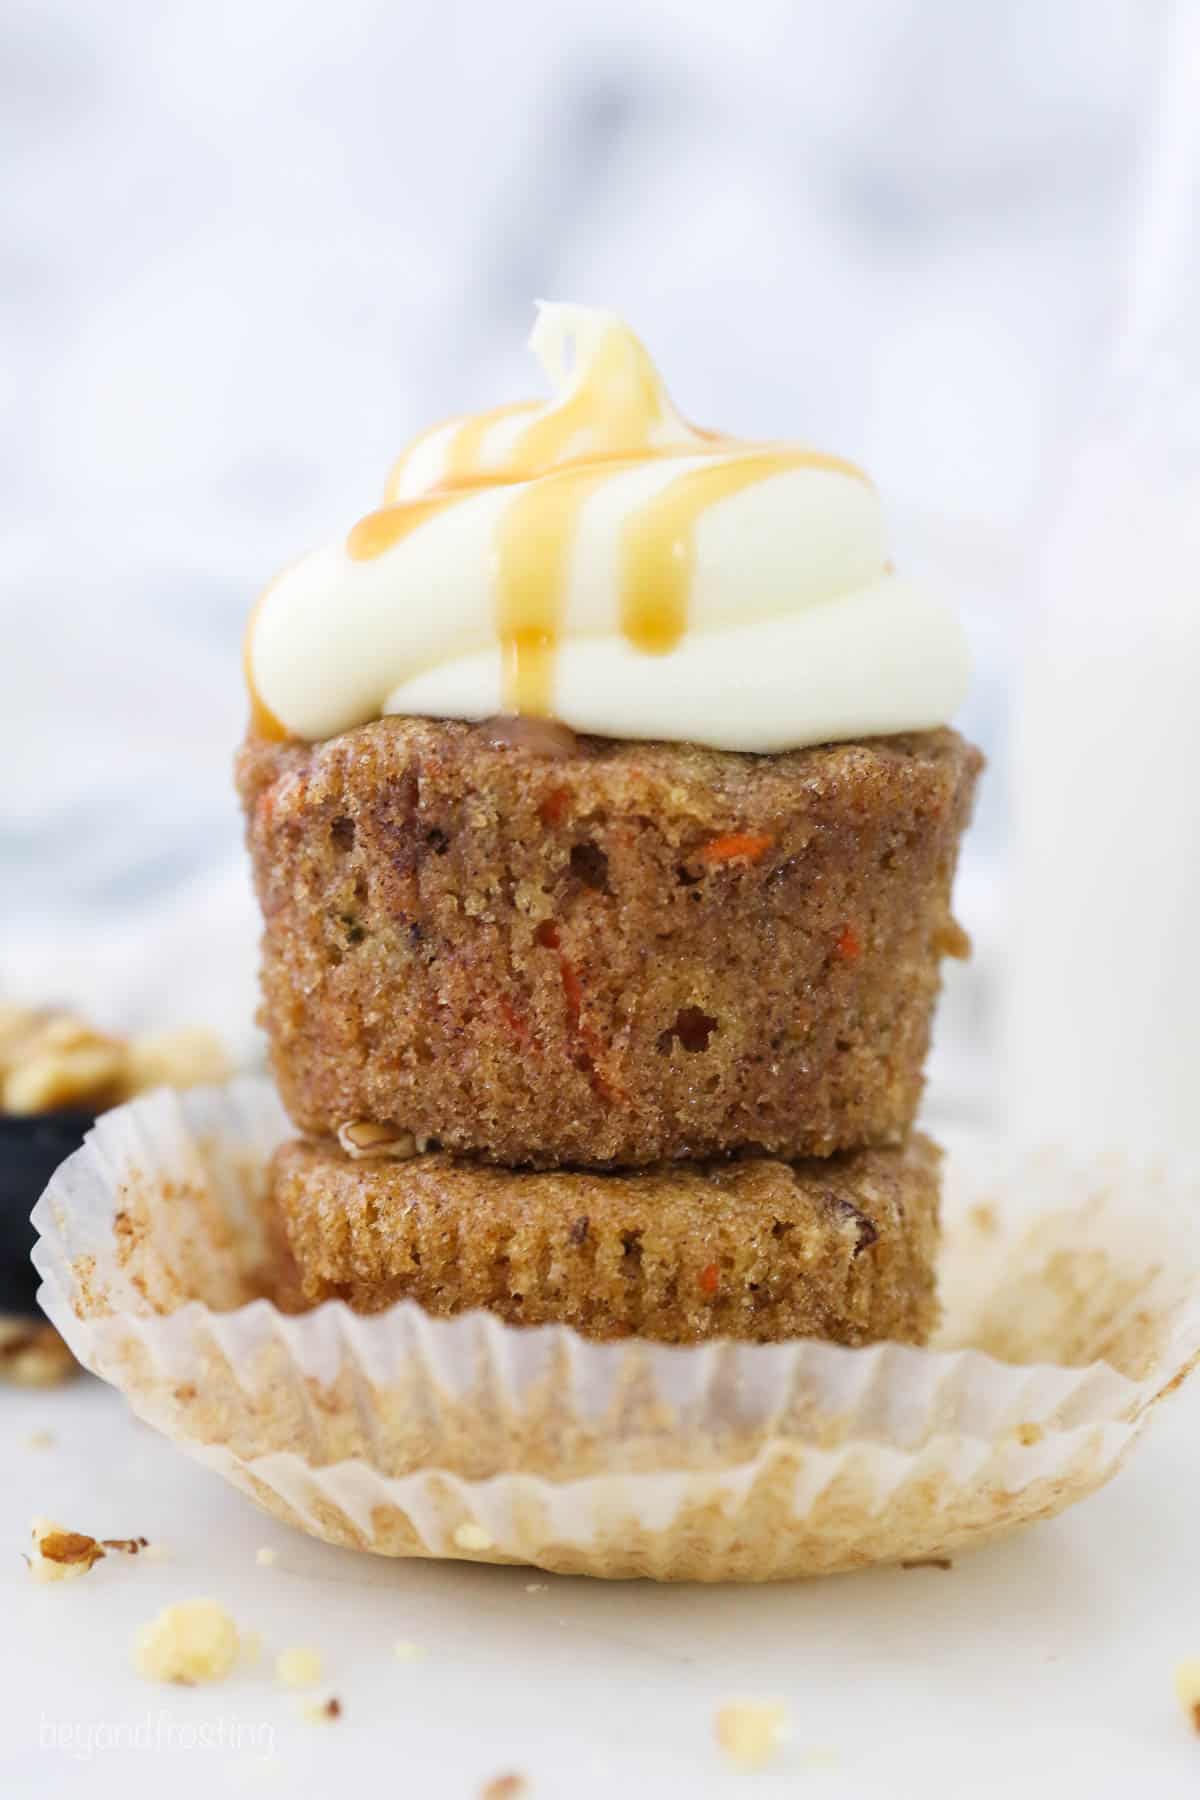 Two gluten free carrot cake cupcakes stacked on each other, the top with cream cheese frosting